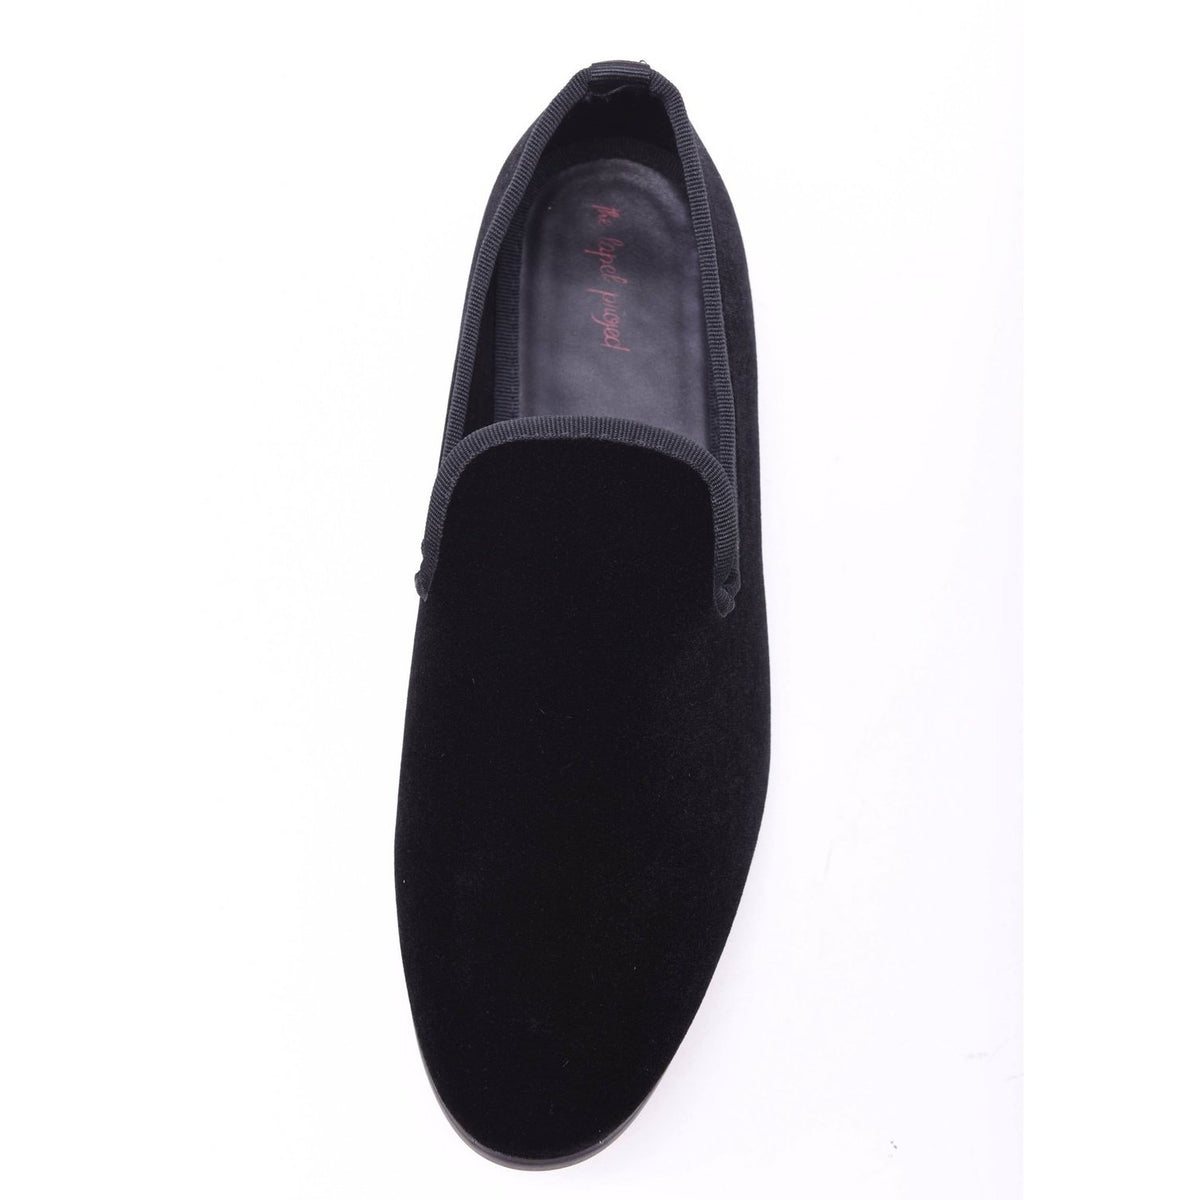 The Lapel Project The Lapel Project Black Velvet Loafer Prom Wedding Slip On Mens Dress Shoes